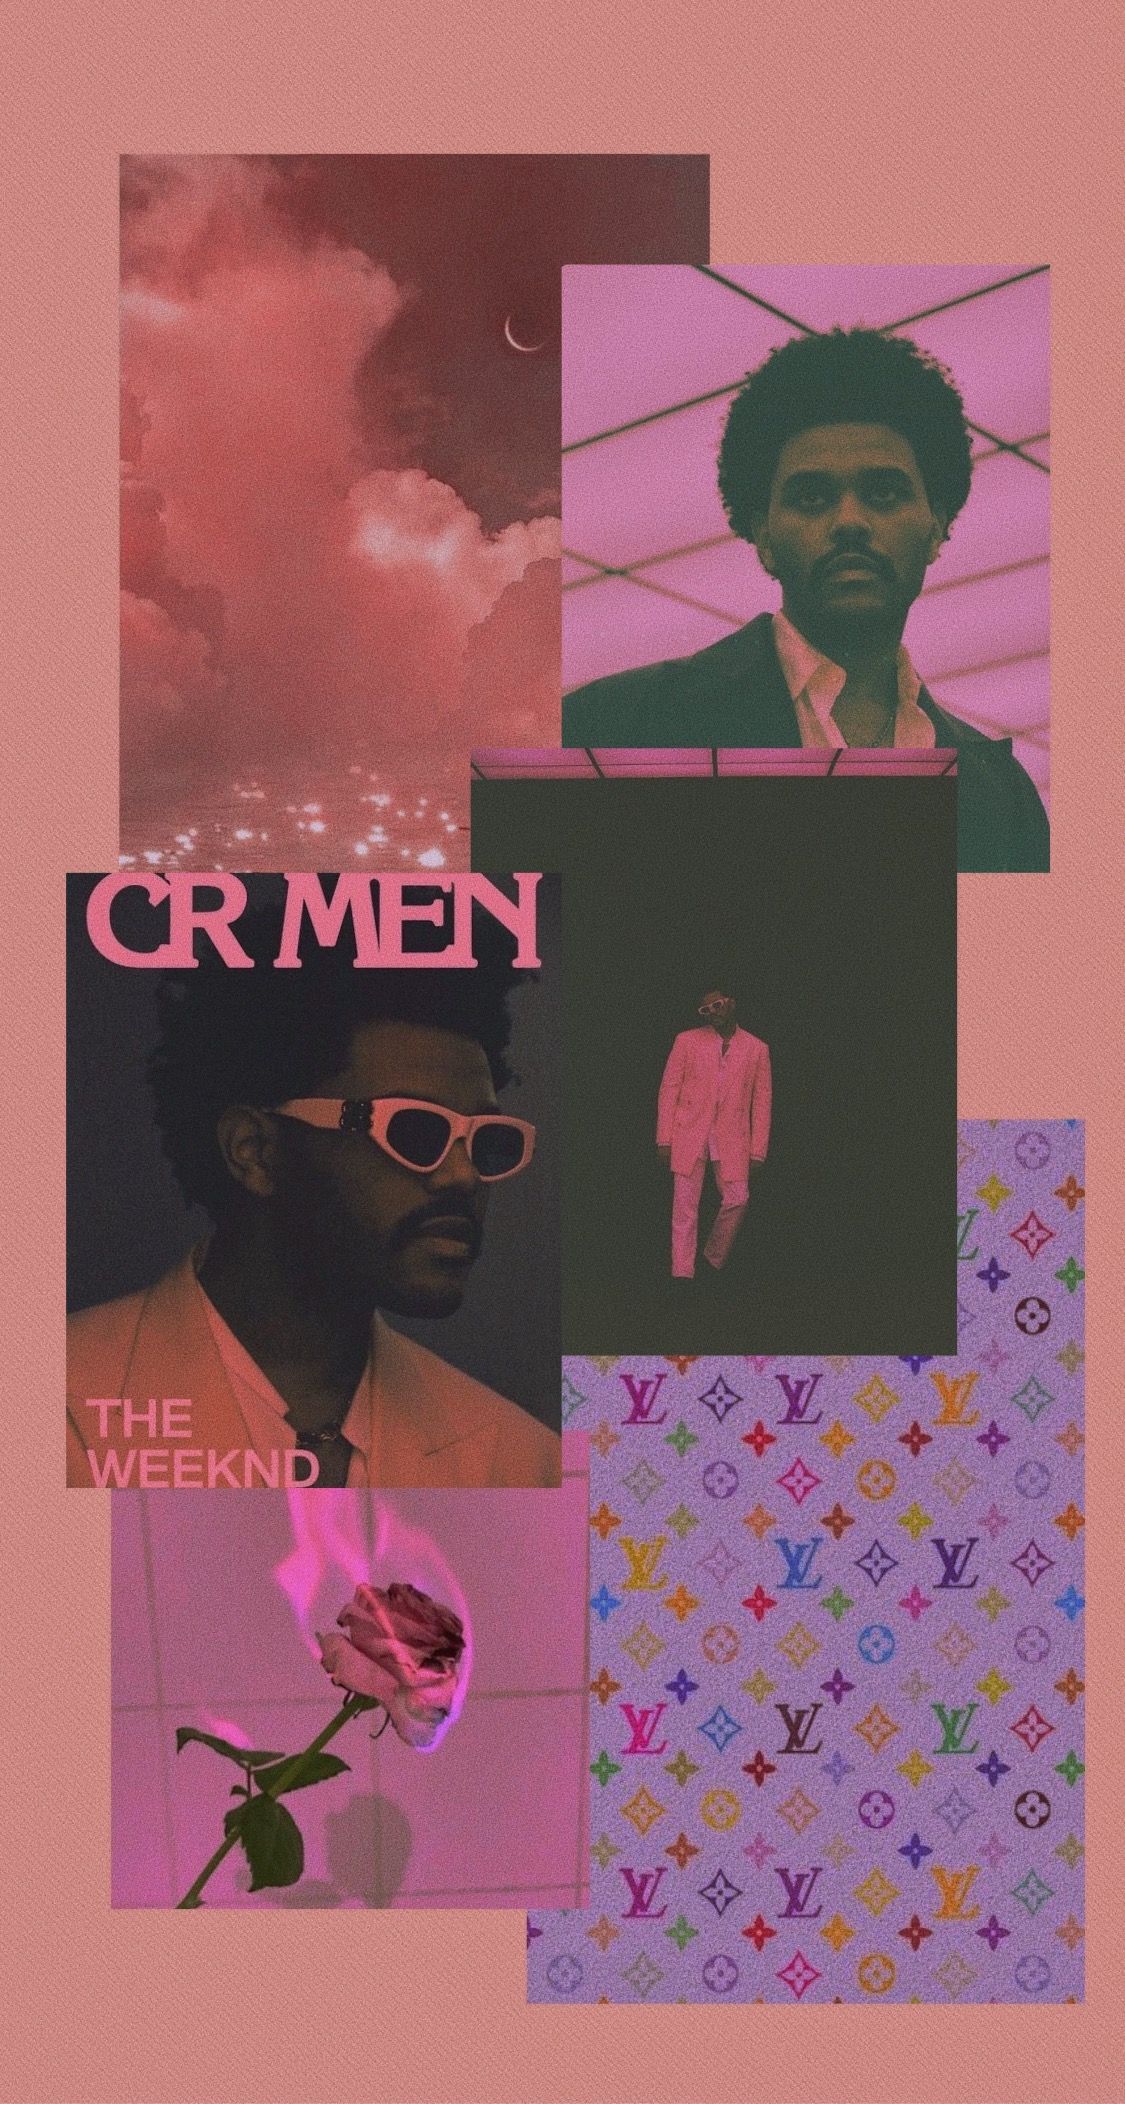 Weeknd <pink aesthetic>. The weeknd wallpaper iphone, The weeknd background, The weeknd poster